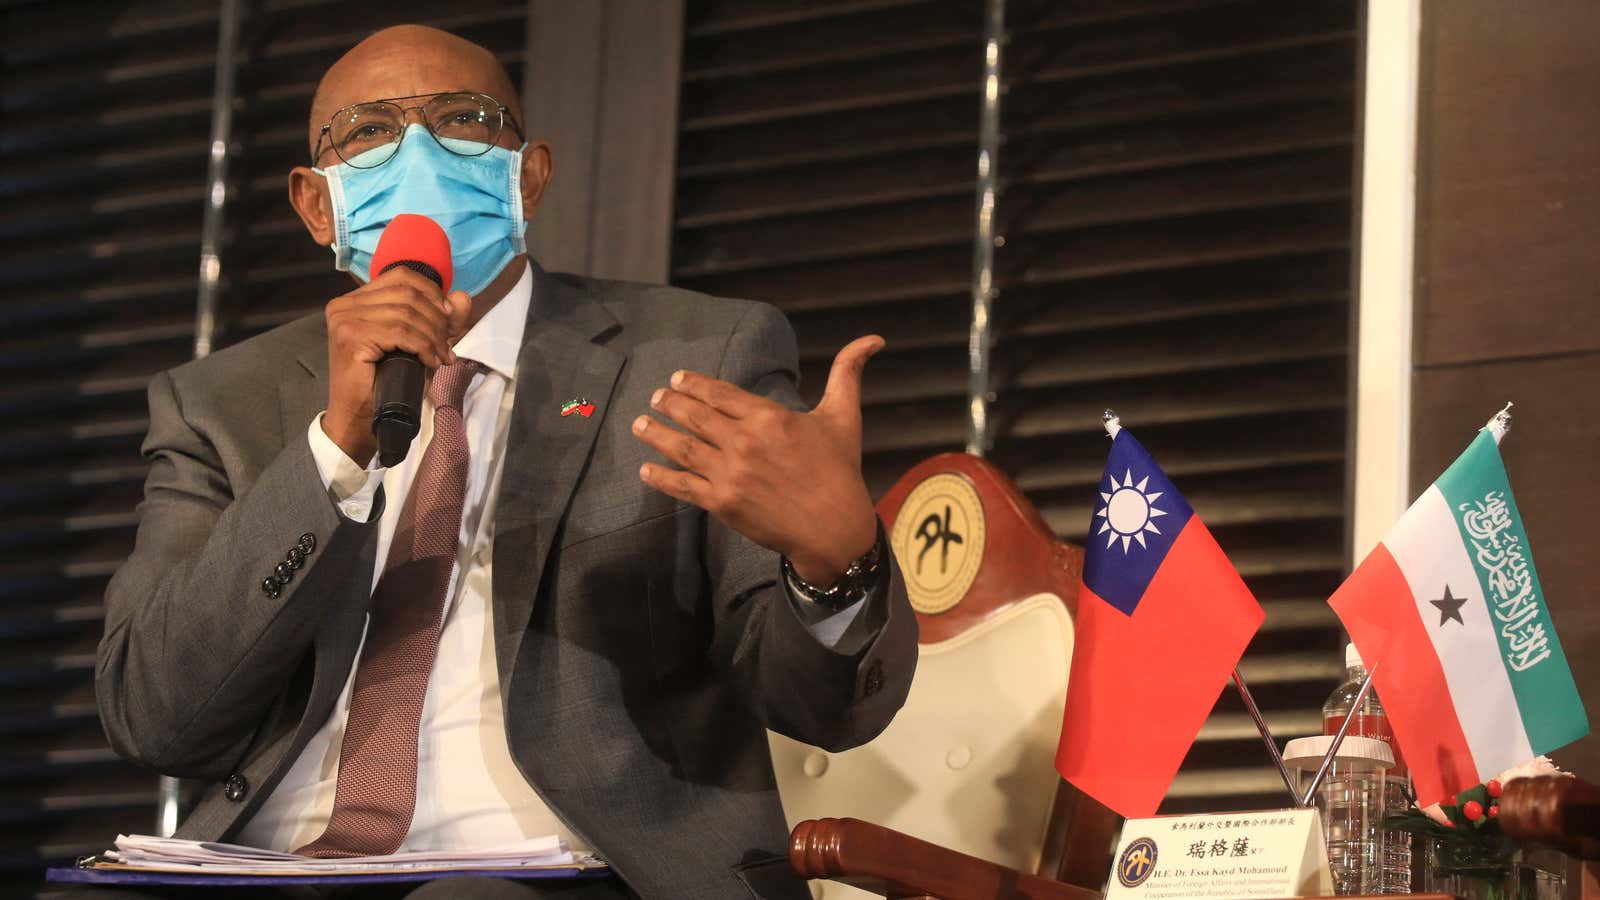 Somaliland’s foreign minister Essa Kayd Mohamoud at a news conference in Taipei, Taiwan.